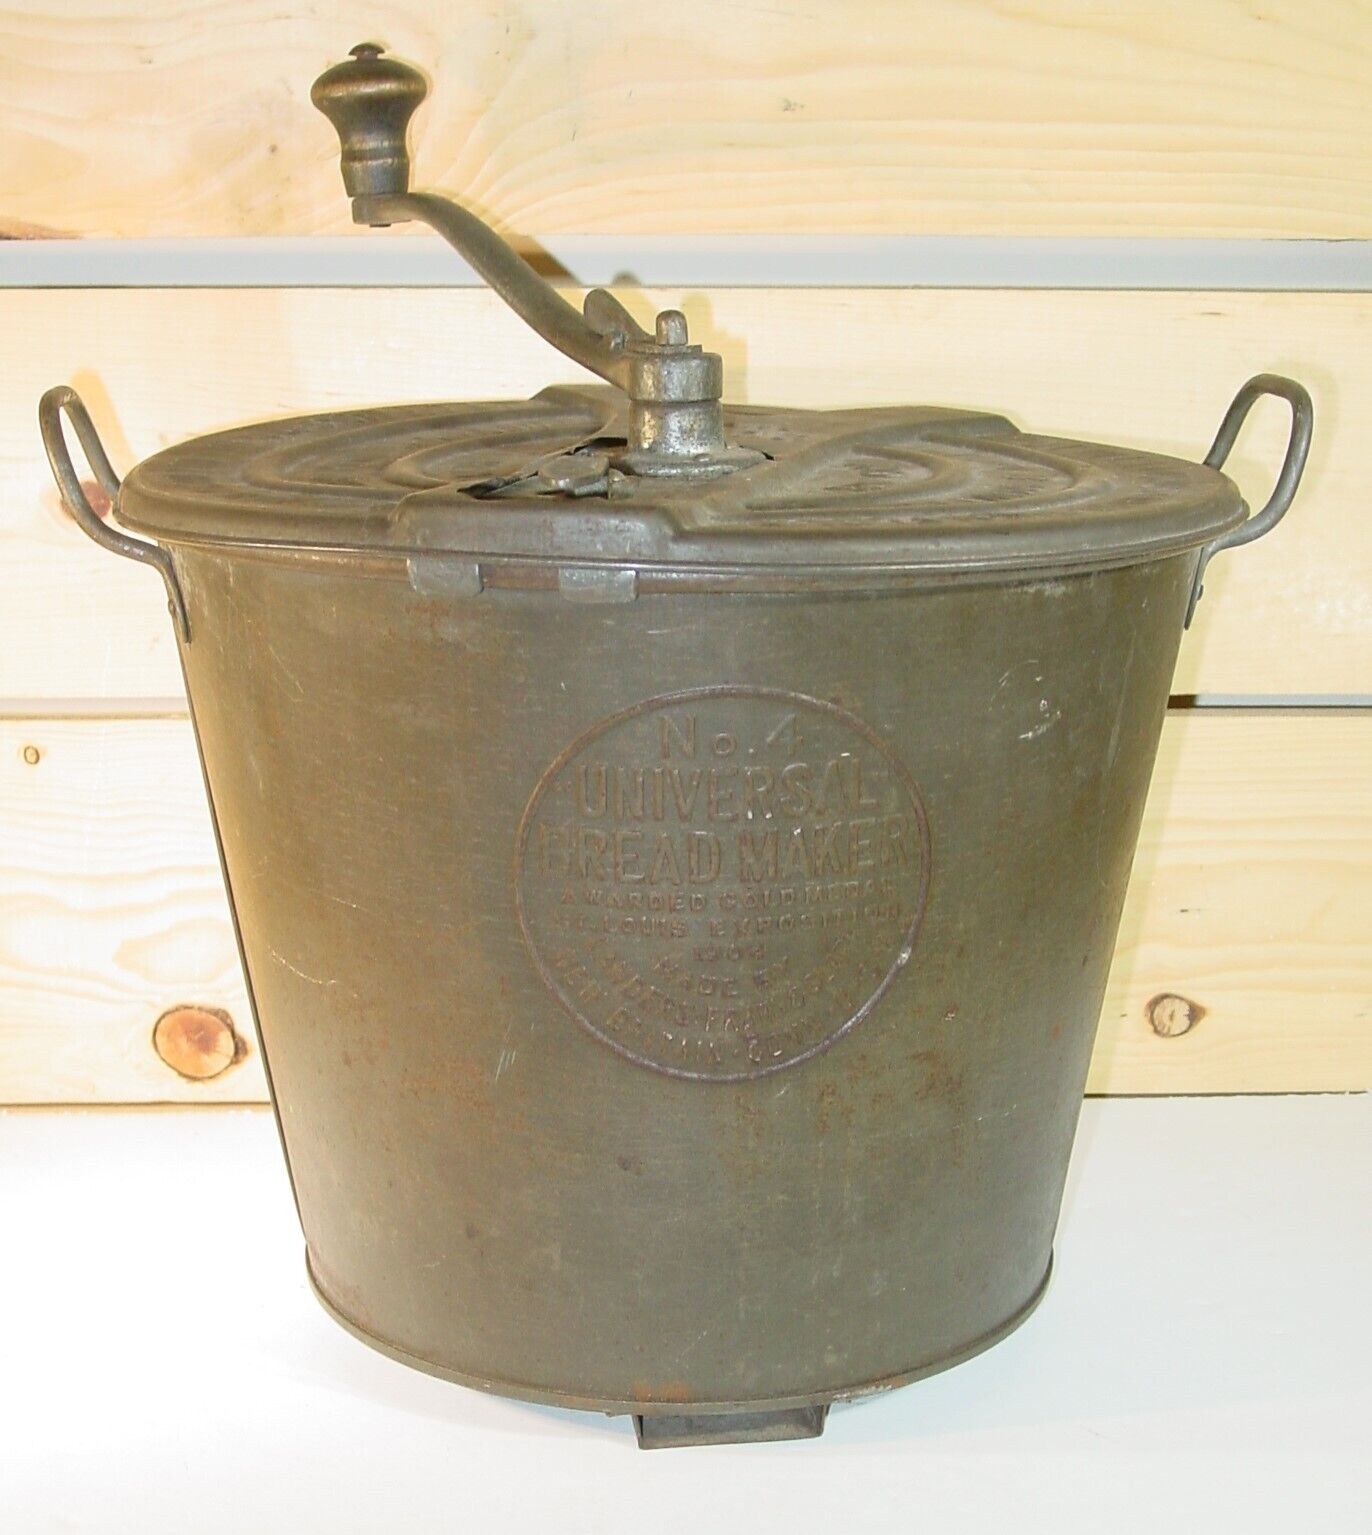 Antique Tin No. 4 Universal Bread Maker by Landers, Frary, & Clark Complete 1906